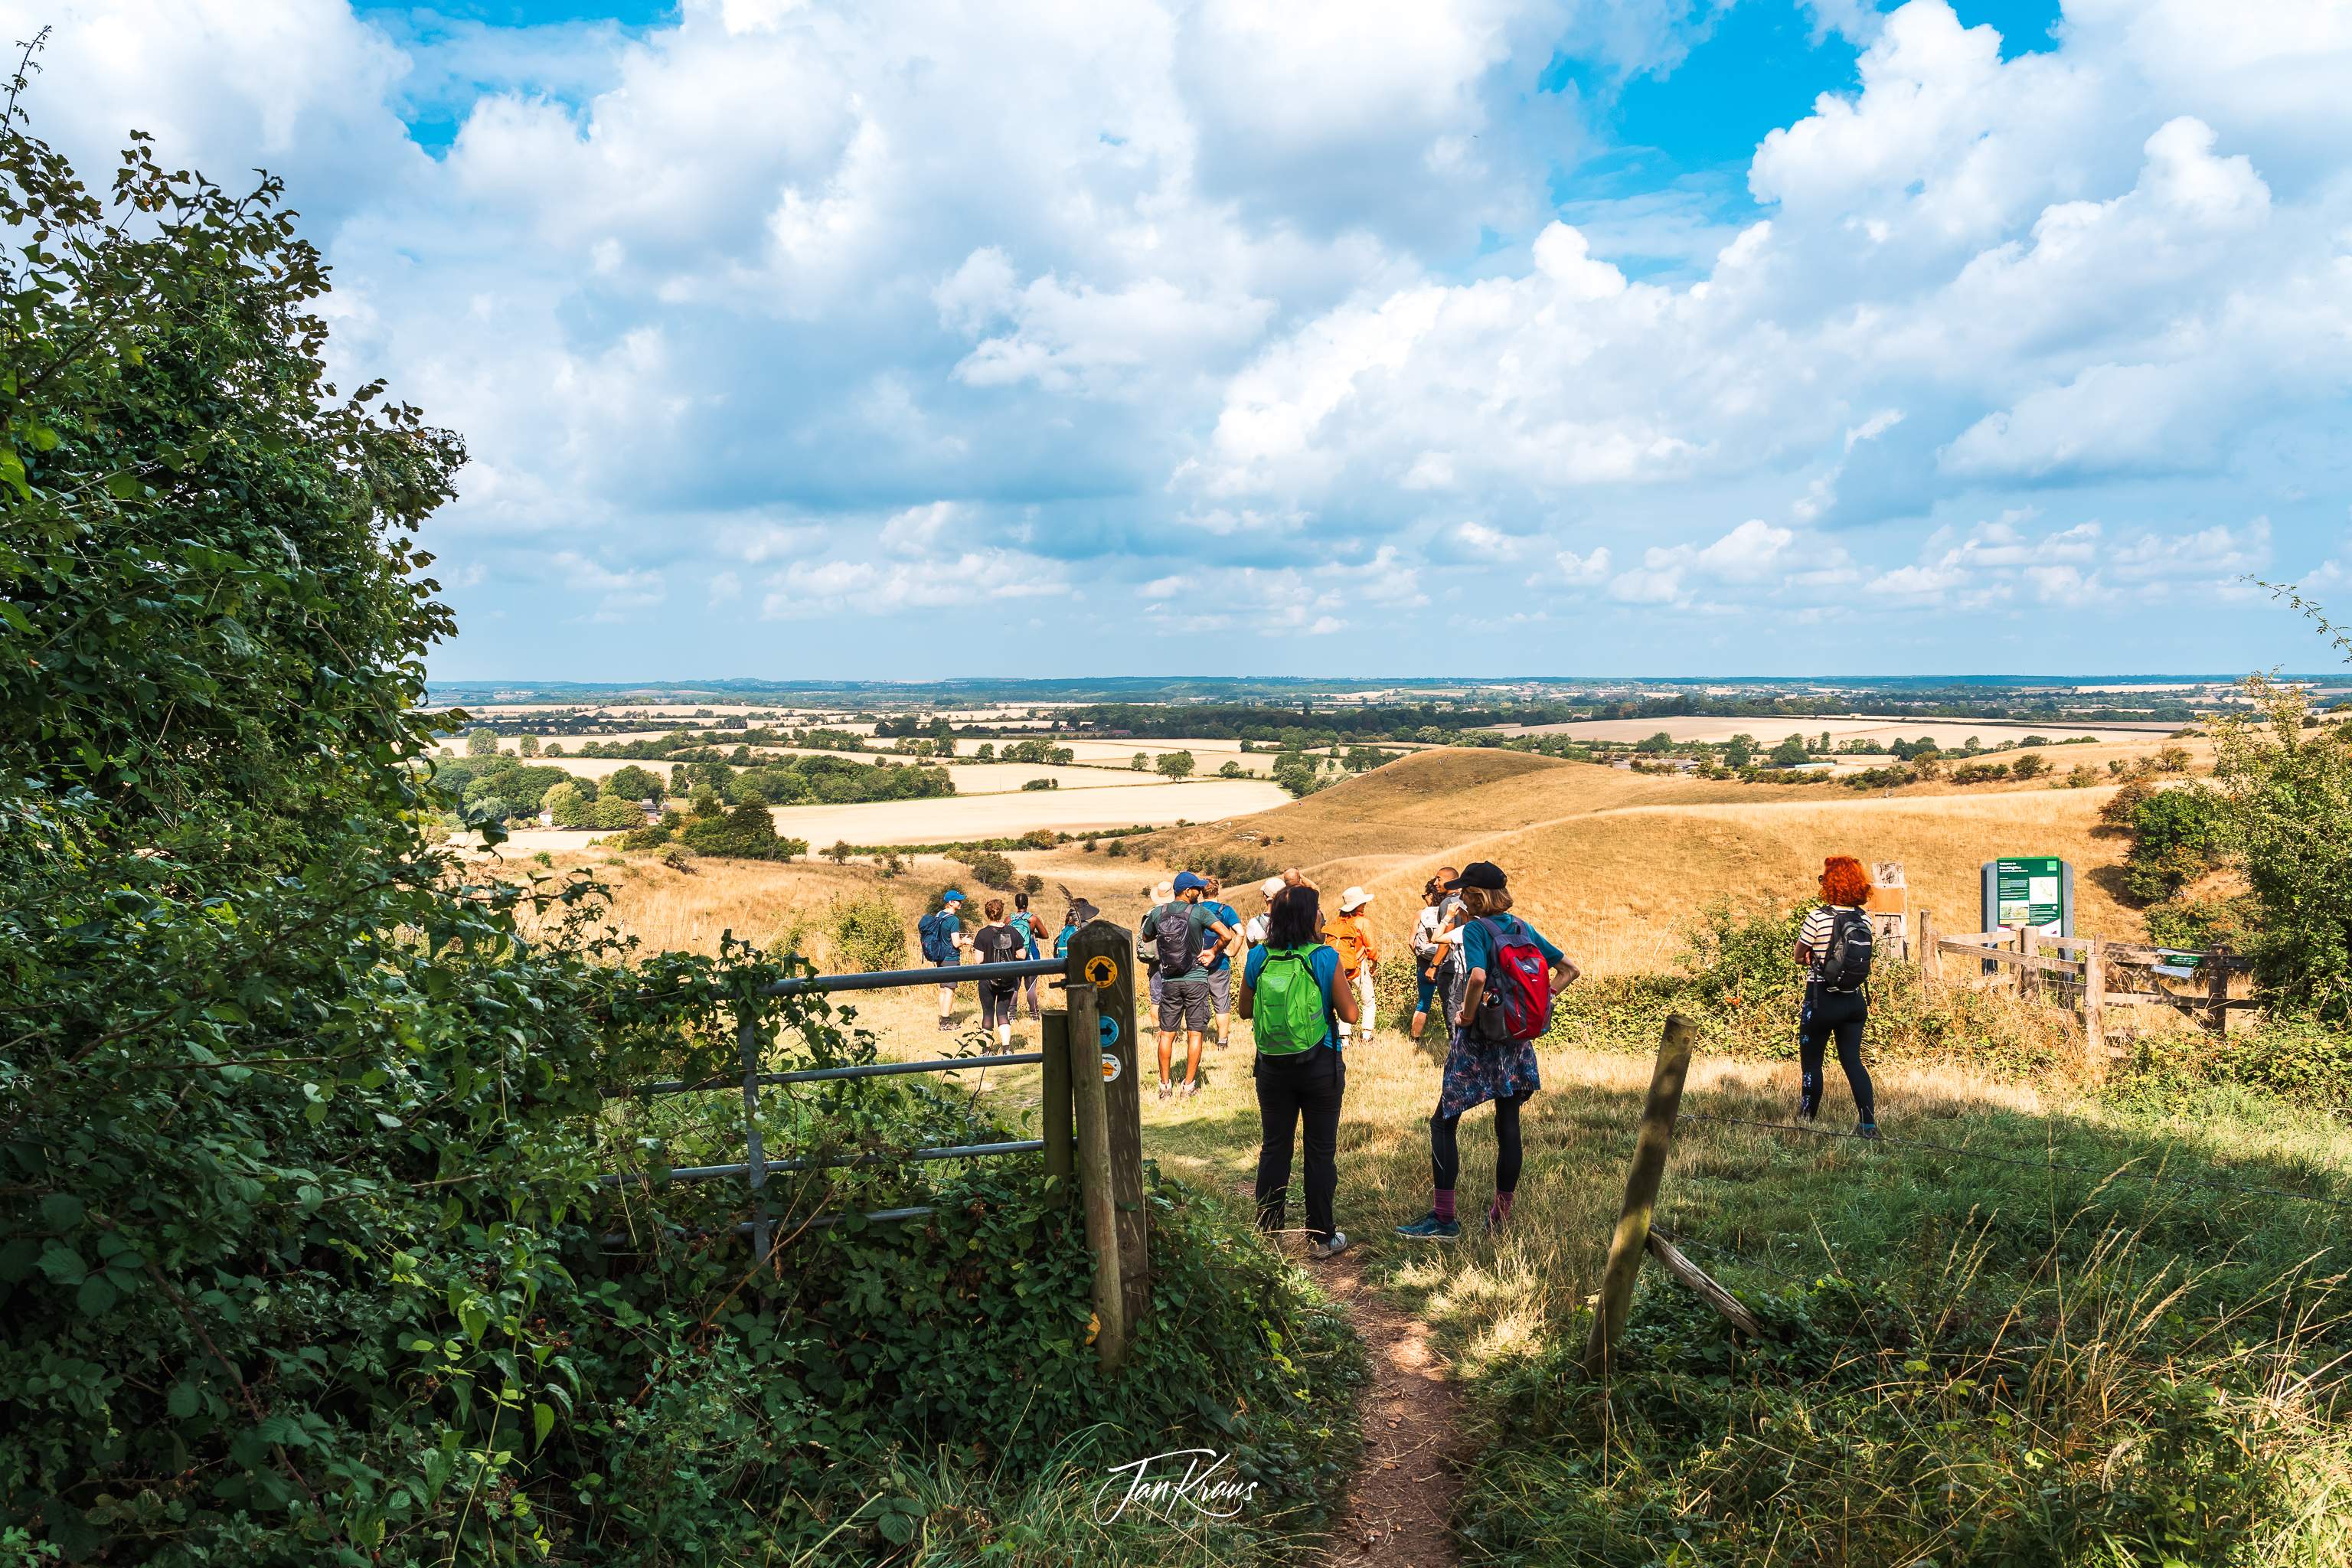 Our group stopping to catch a breath and admire views over Knocking Hoe National Nature Reserve (right side of the picture), Hertfordshire, England, UK